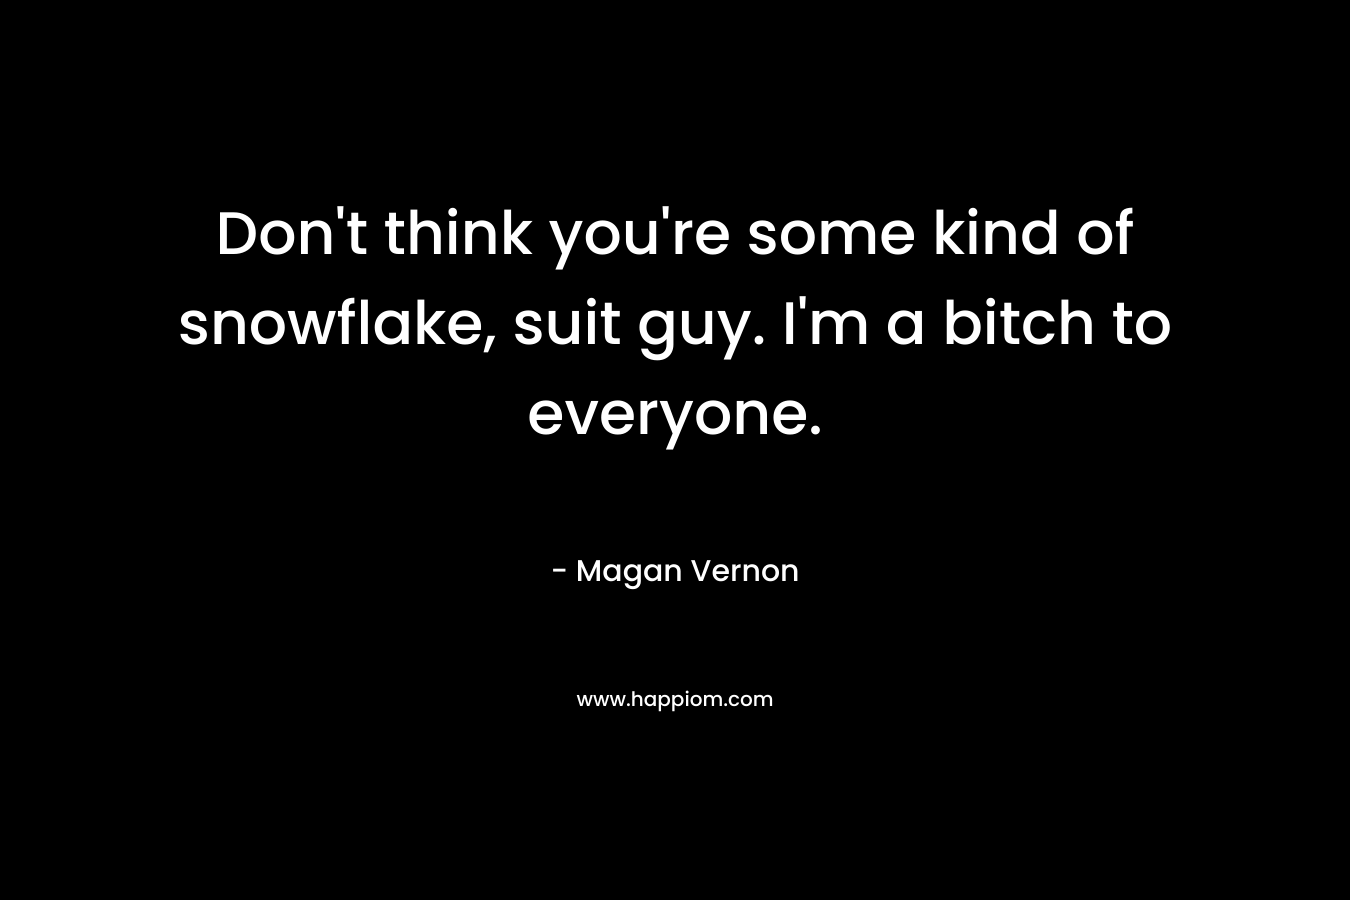 Don’t think you’re some kind of snowflake, suit guy. I’m a bitch to everyone. – Magan Vernon